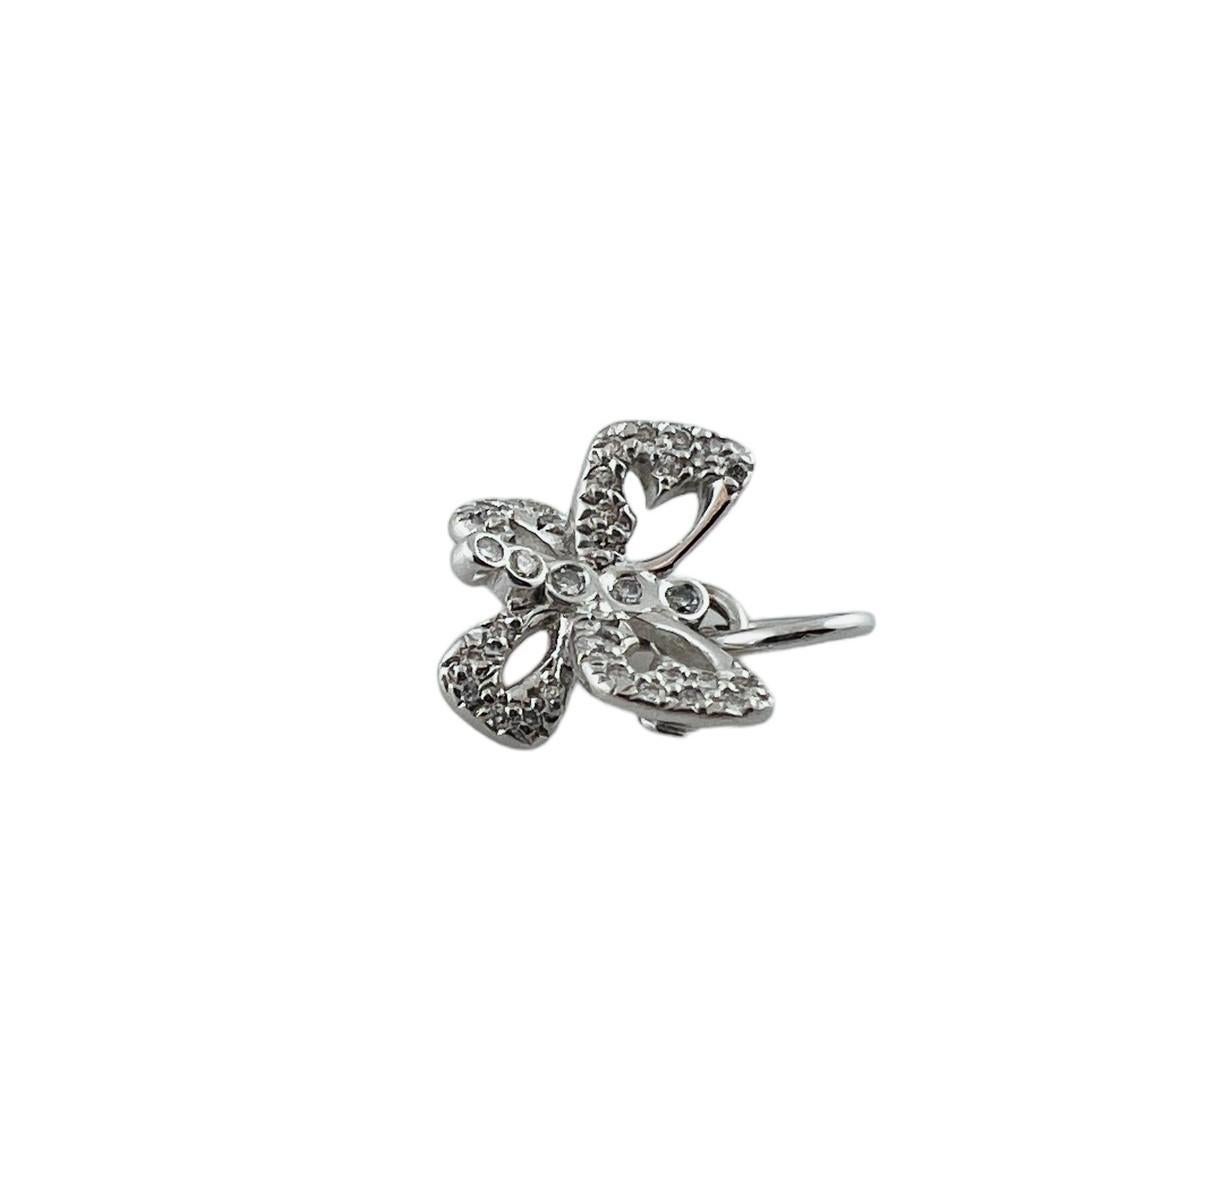 Brilliant Cut Roberto Coin 18 Karat White Gold and Diamond Butterfly Pendant #16637 For Sale